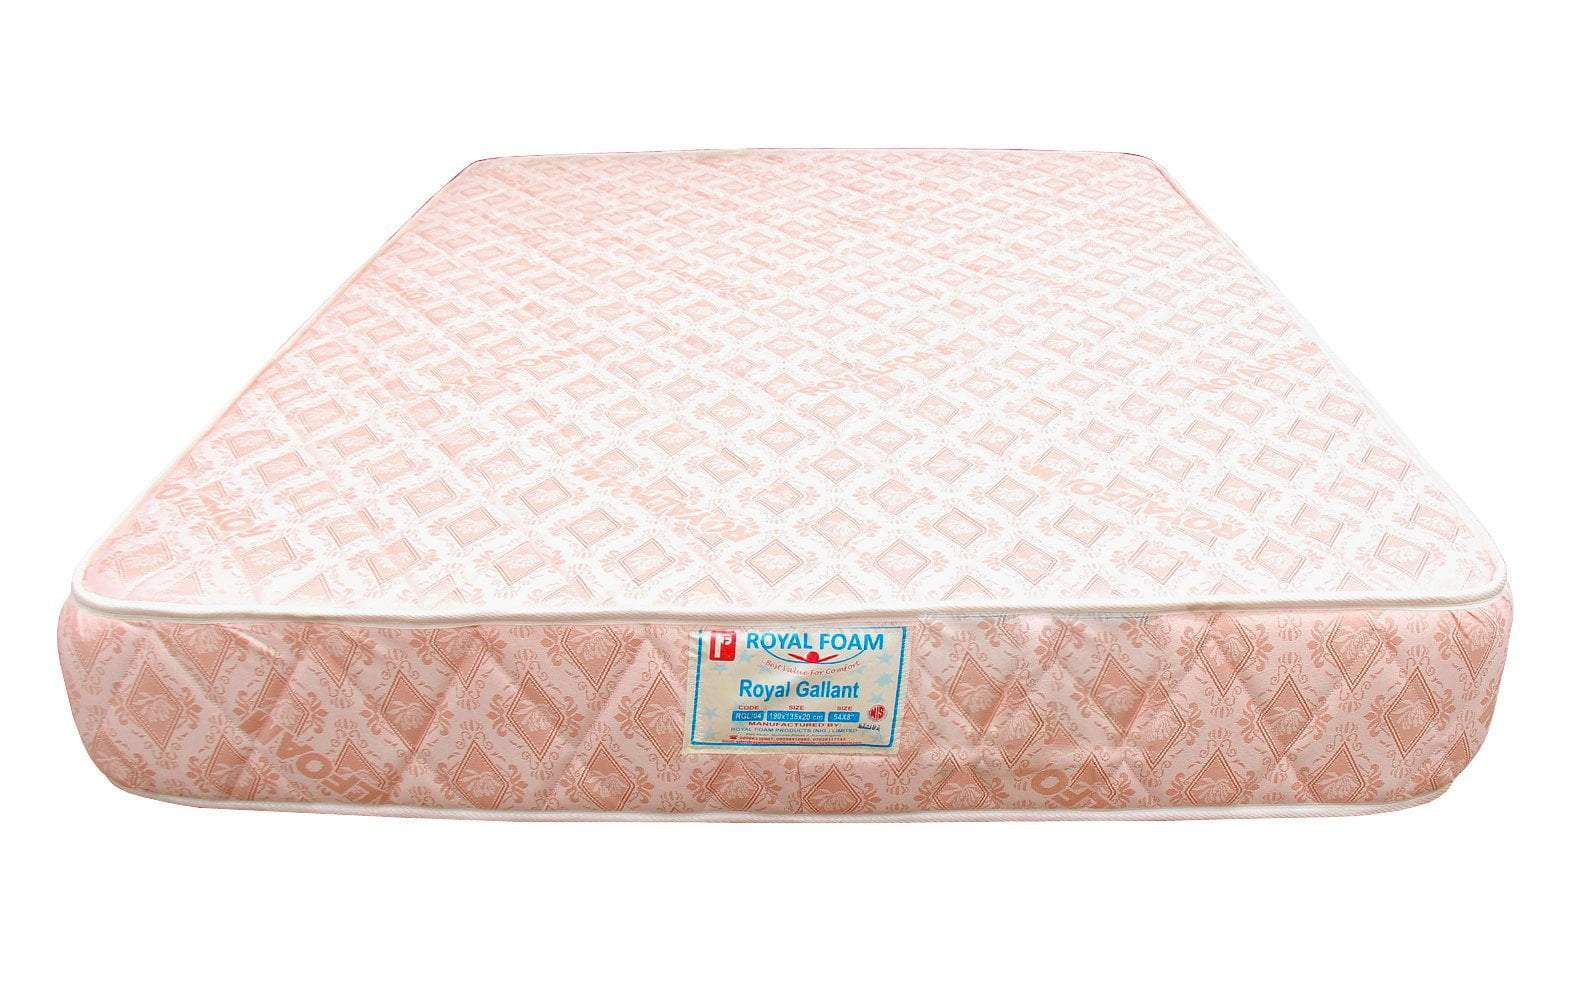 Royal Gallant Plus JACQUARD fabric-Fully Quilted Mattress 190 X 105 X 20 CM(6ft x 3.5ft x 8inches) Single(Lagos Only)